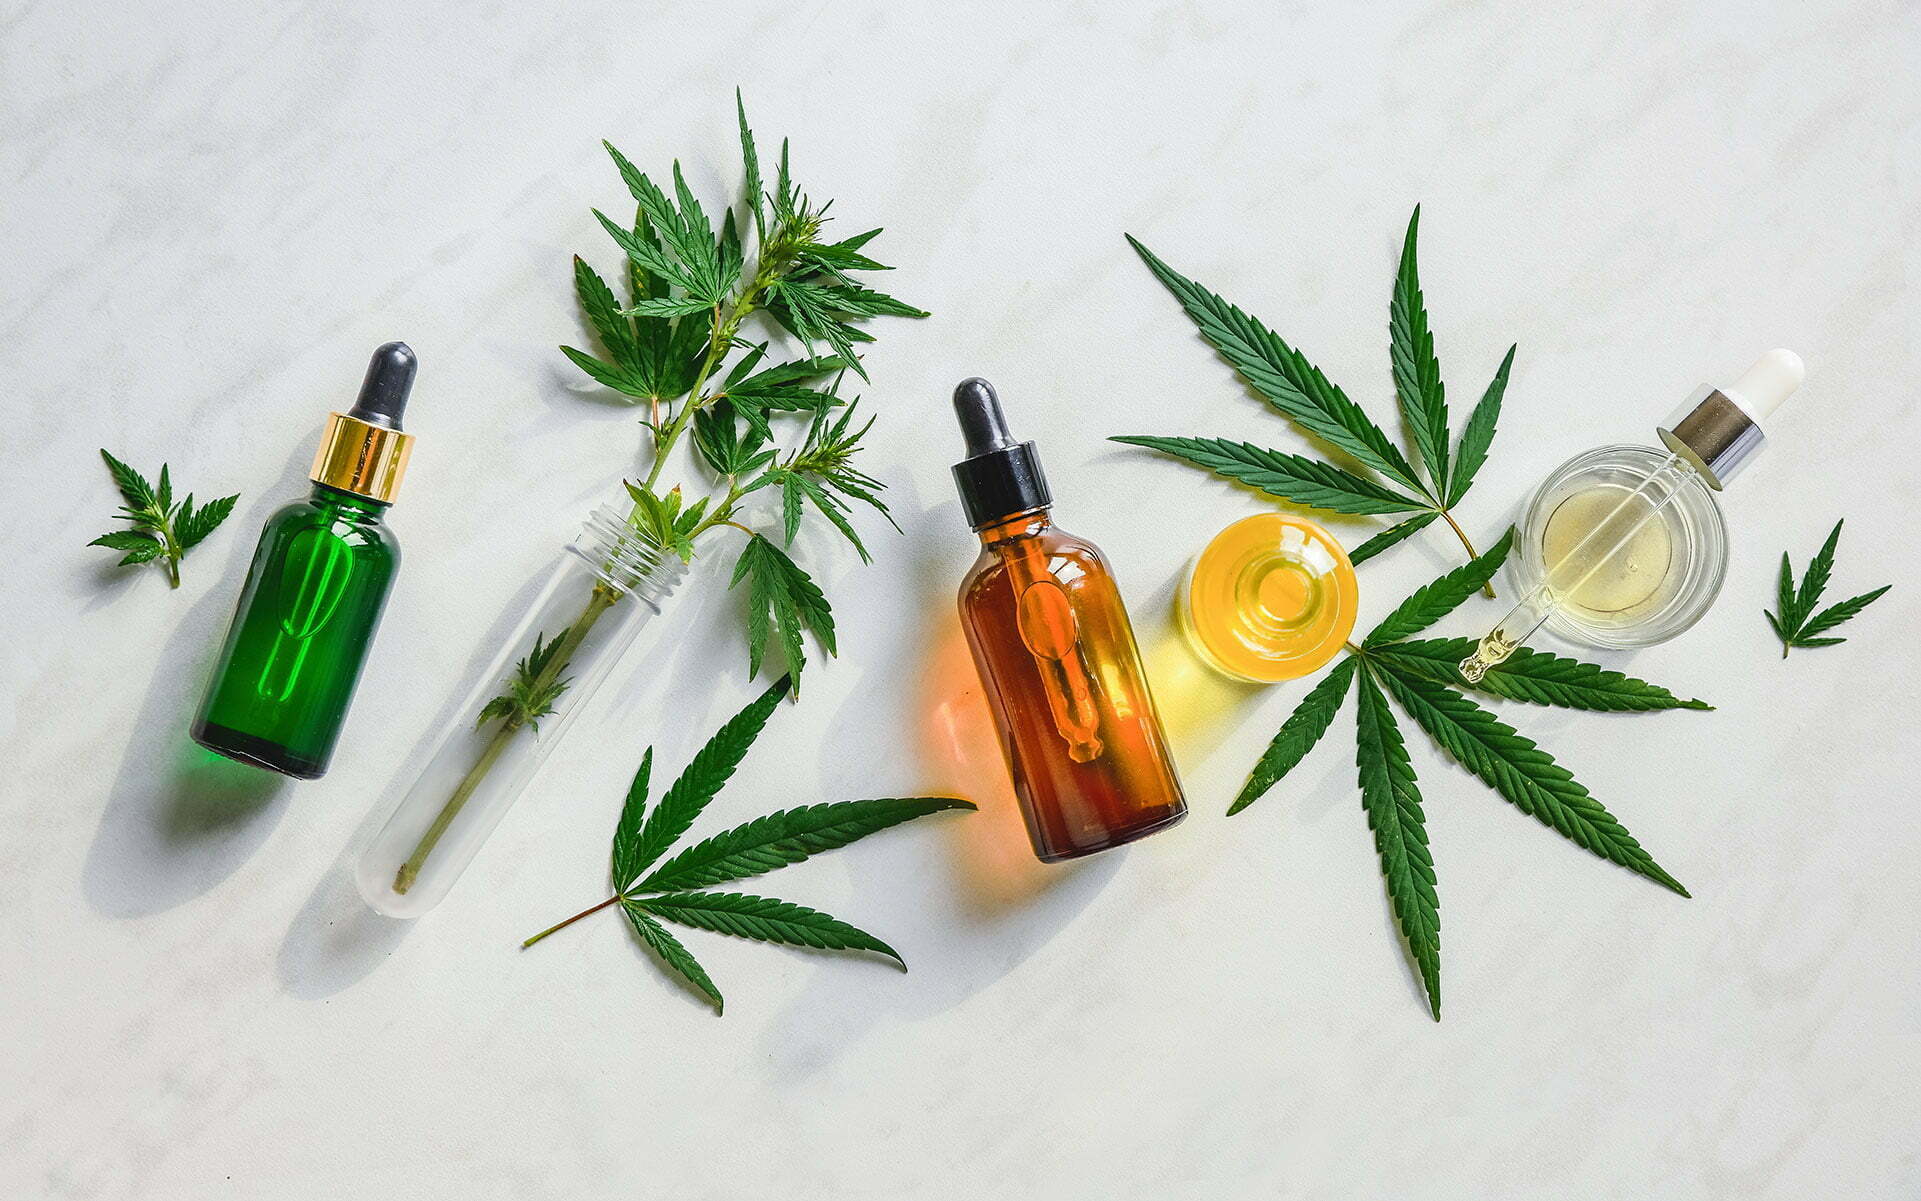 Can I replace my pain medication with CBD?